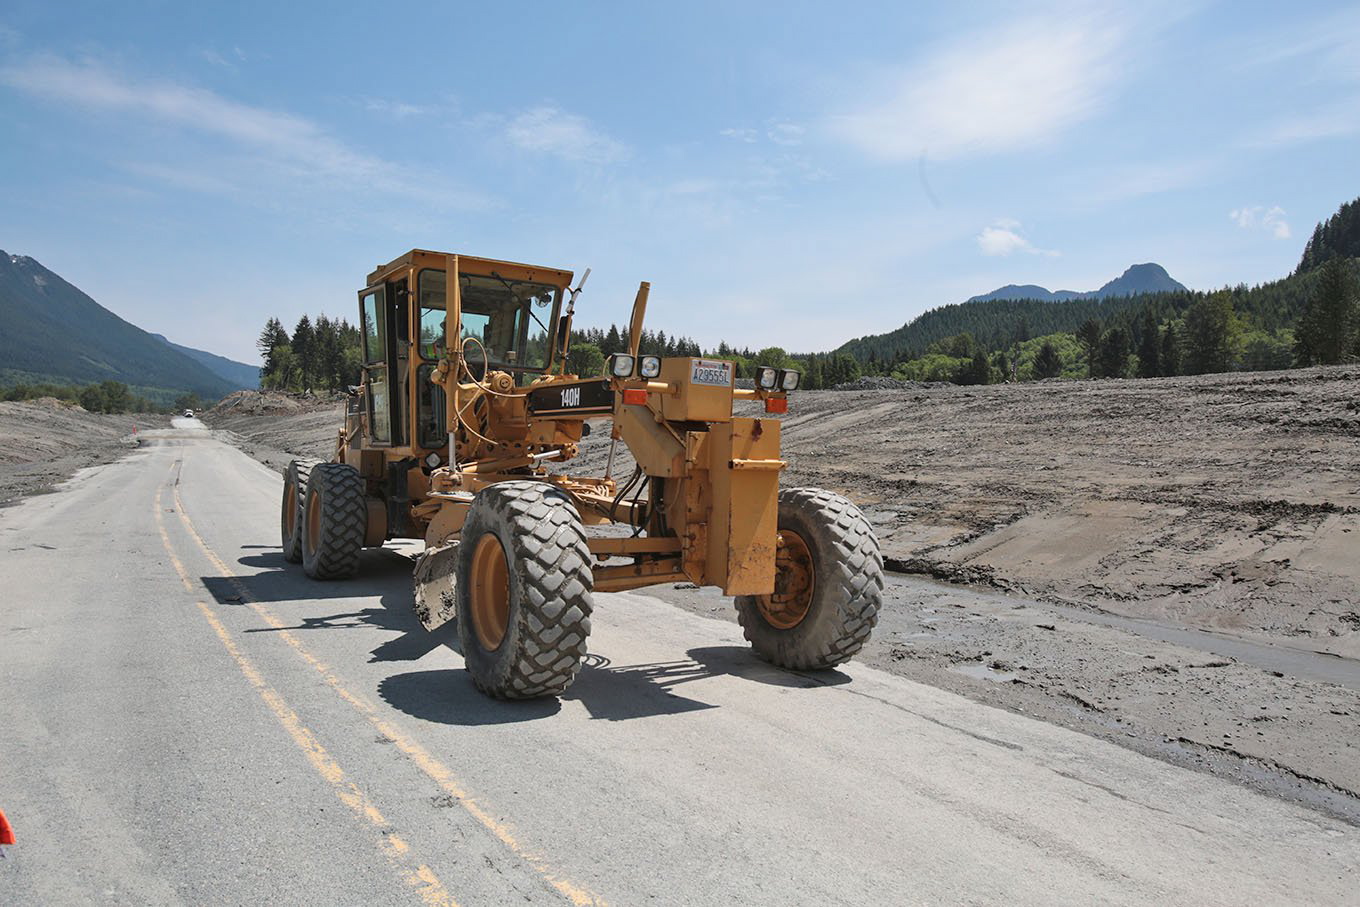 Road crews work to finish repair work on Highway 530 on Friday in Oso, which was buried in mud by a March 22 mudslide. The road will reopen today.